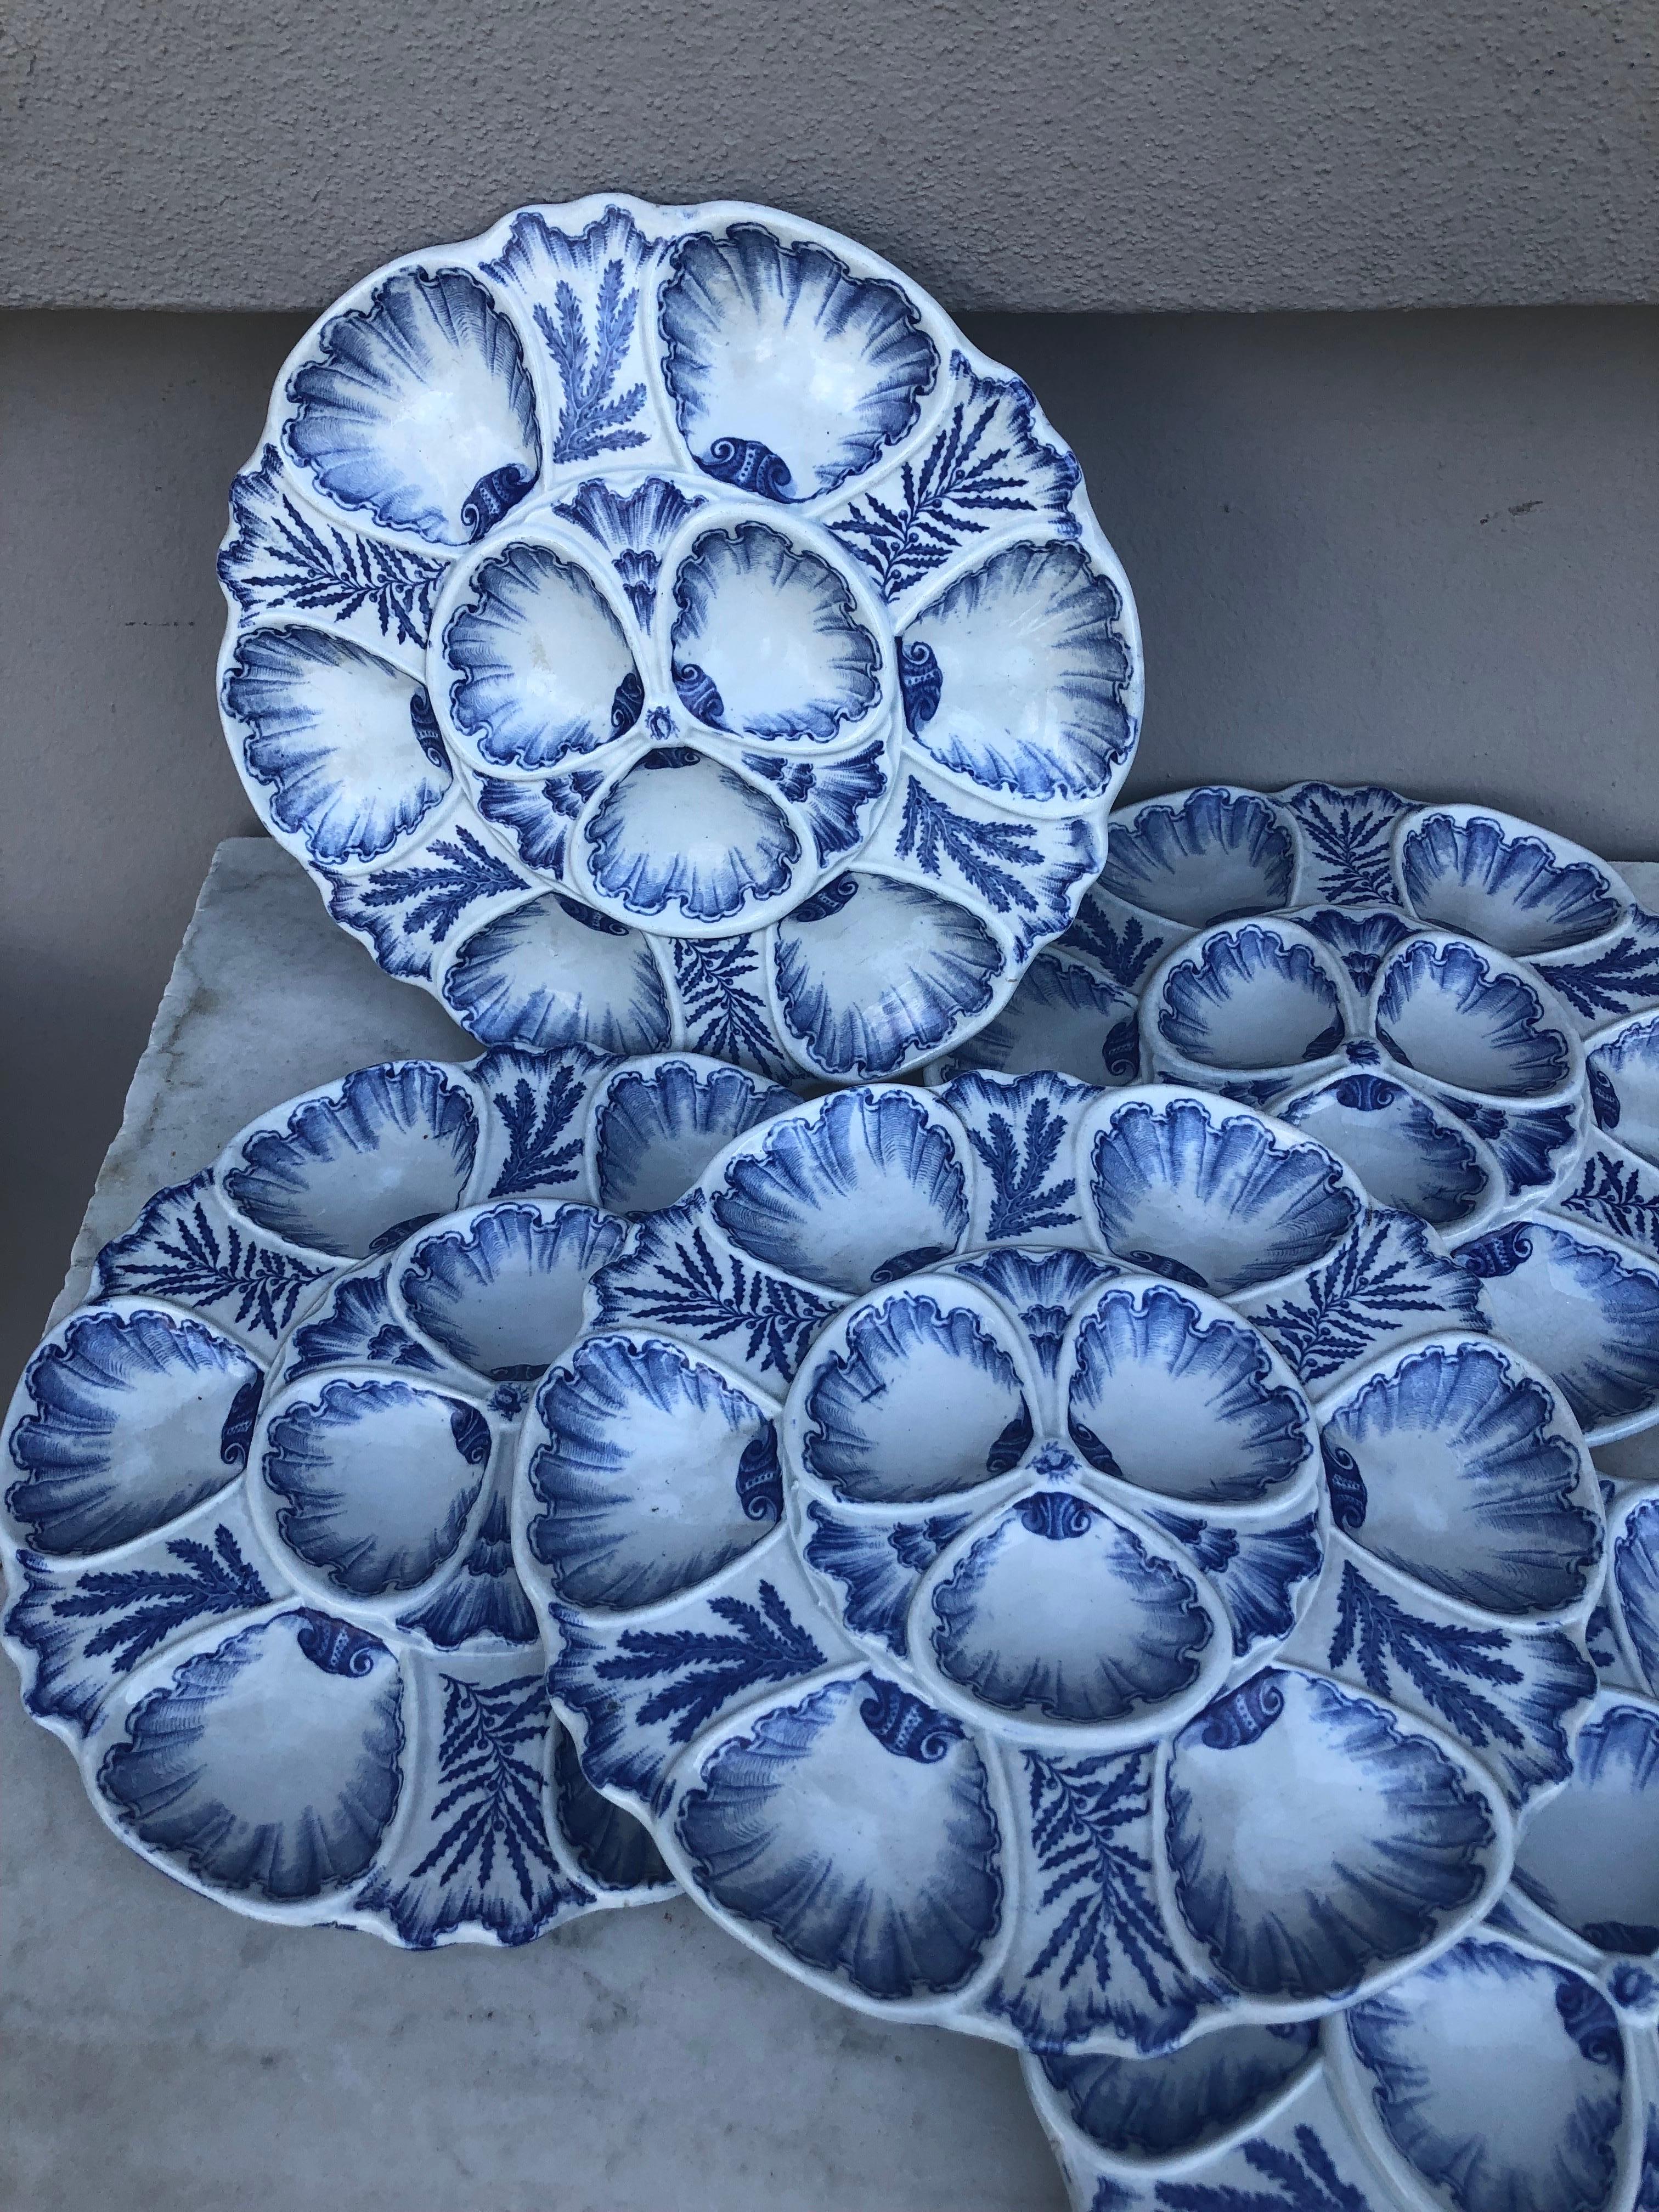 19th Century faience blue and white oyster plate signed J. Vieillard & Cie Bordeaux decorated with seaweeds.
Large size.
Mark / 1829-1895.
8 plates available.